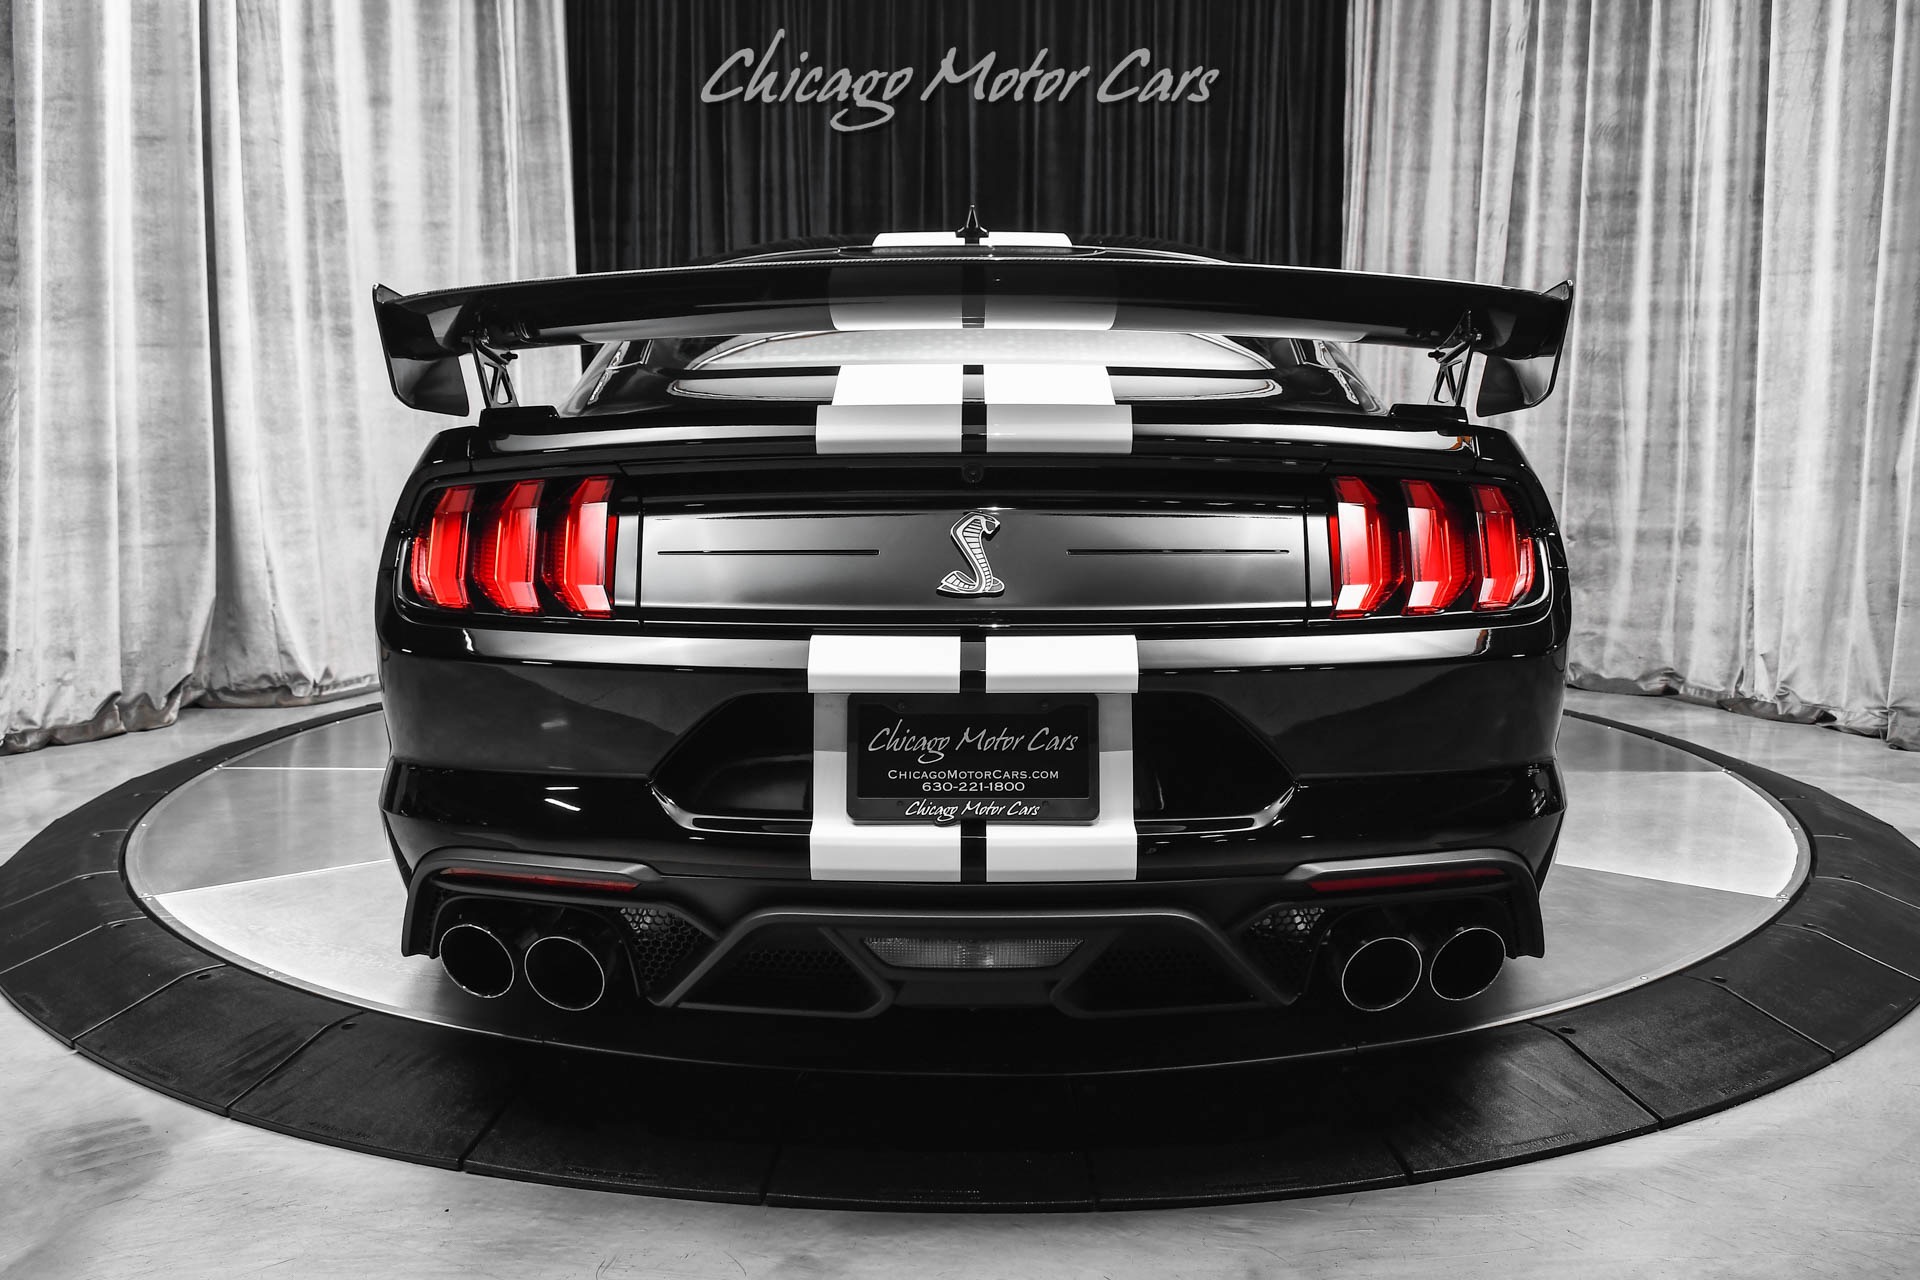 Used-2020-Ford-Mustang-Shelby-GT500-Golden-Ticket-Carbon-Fiber-Track-Pack-3K-Miles